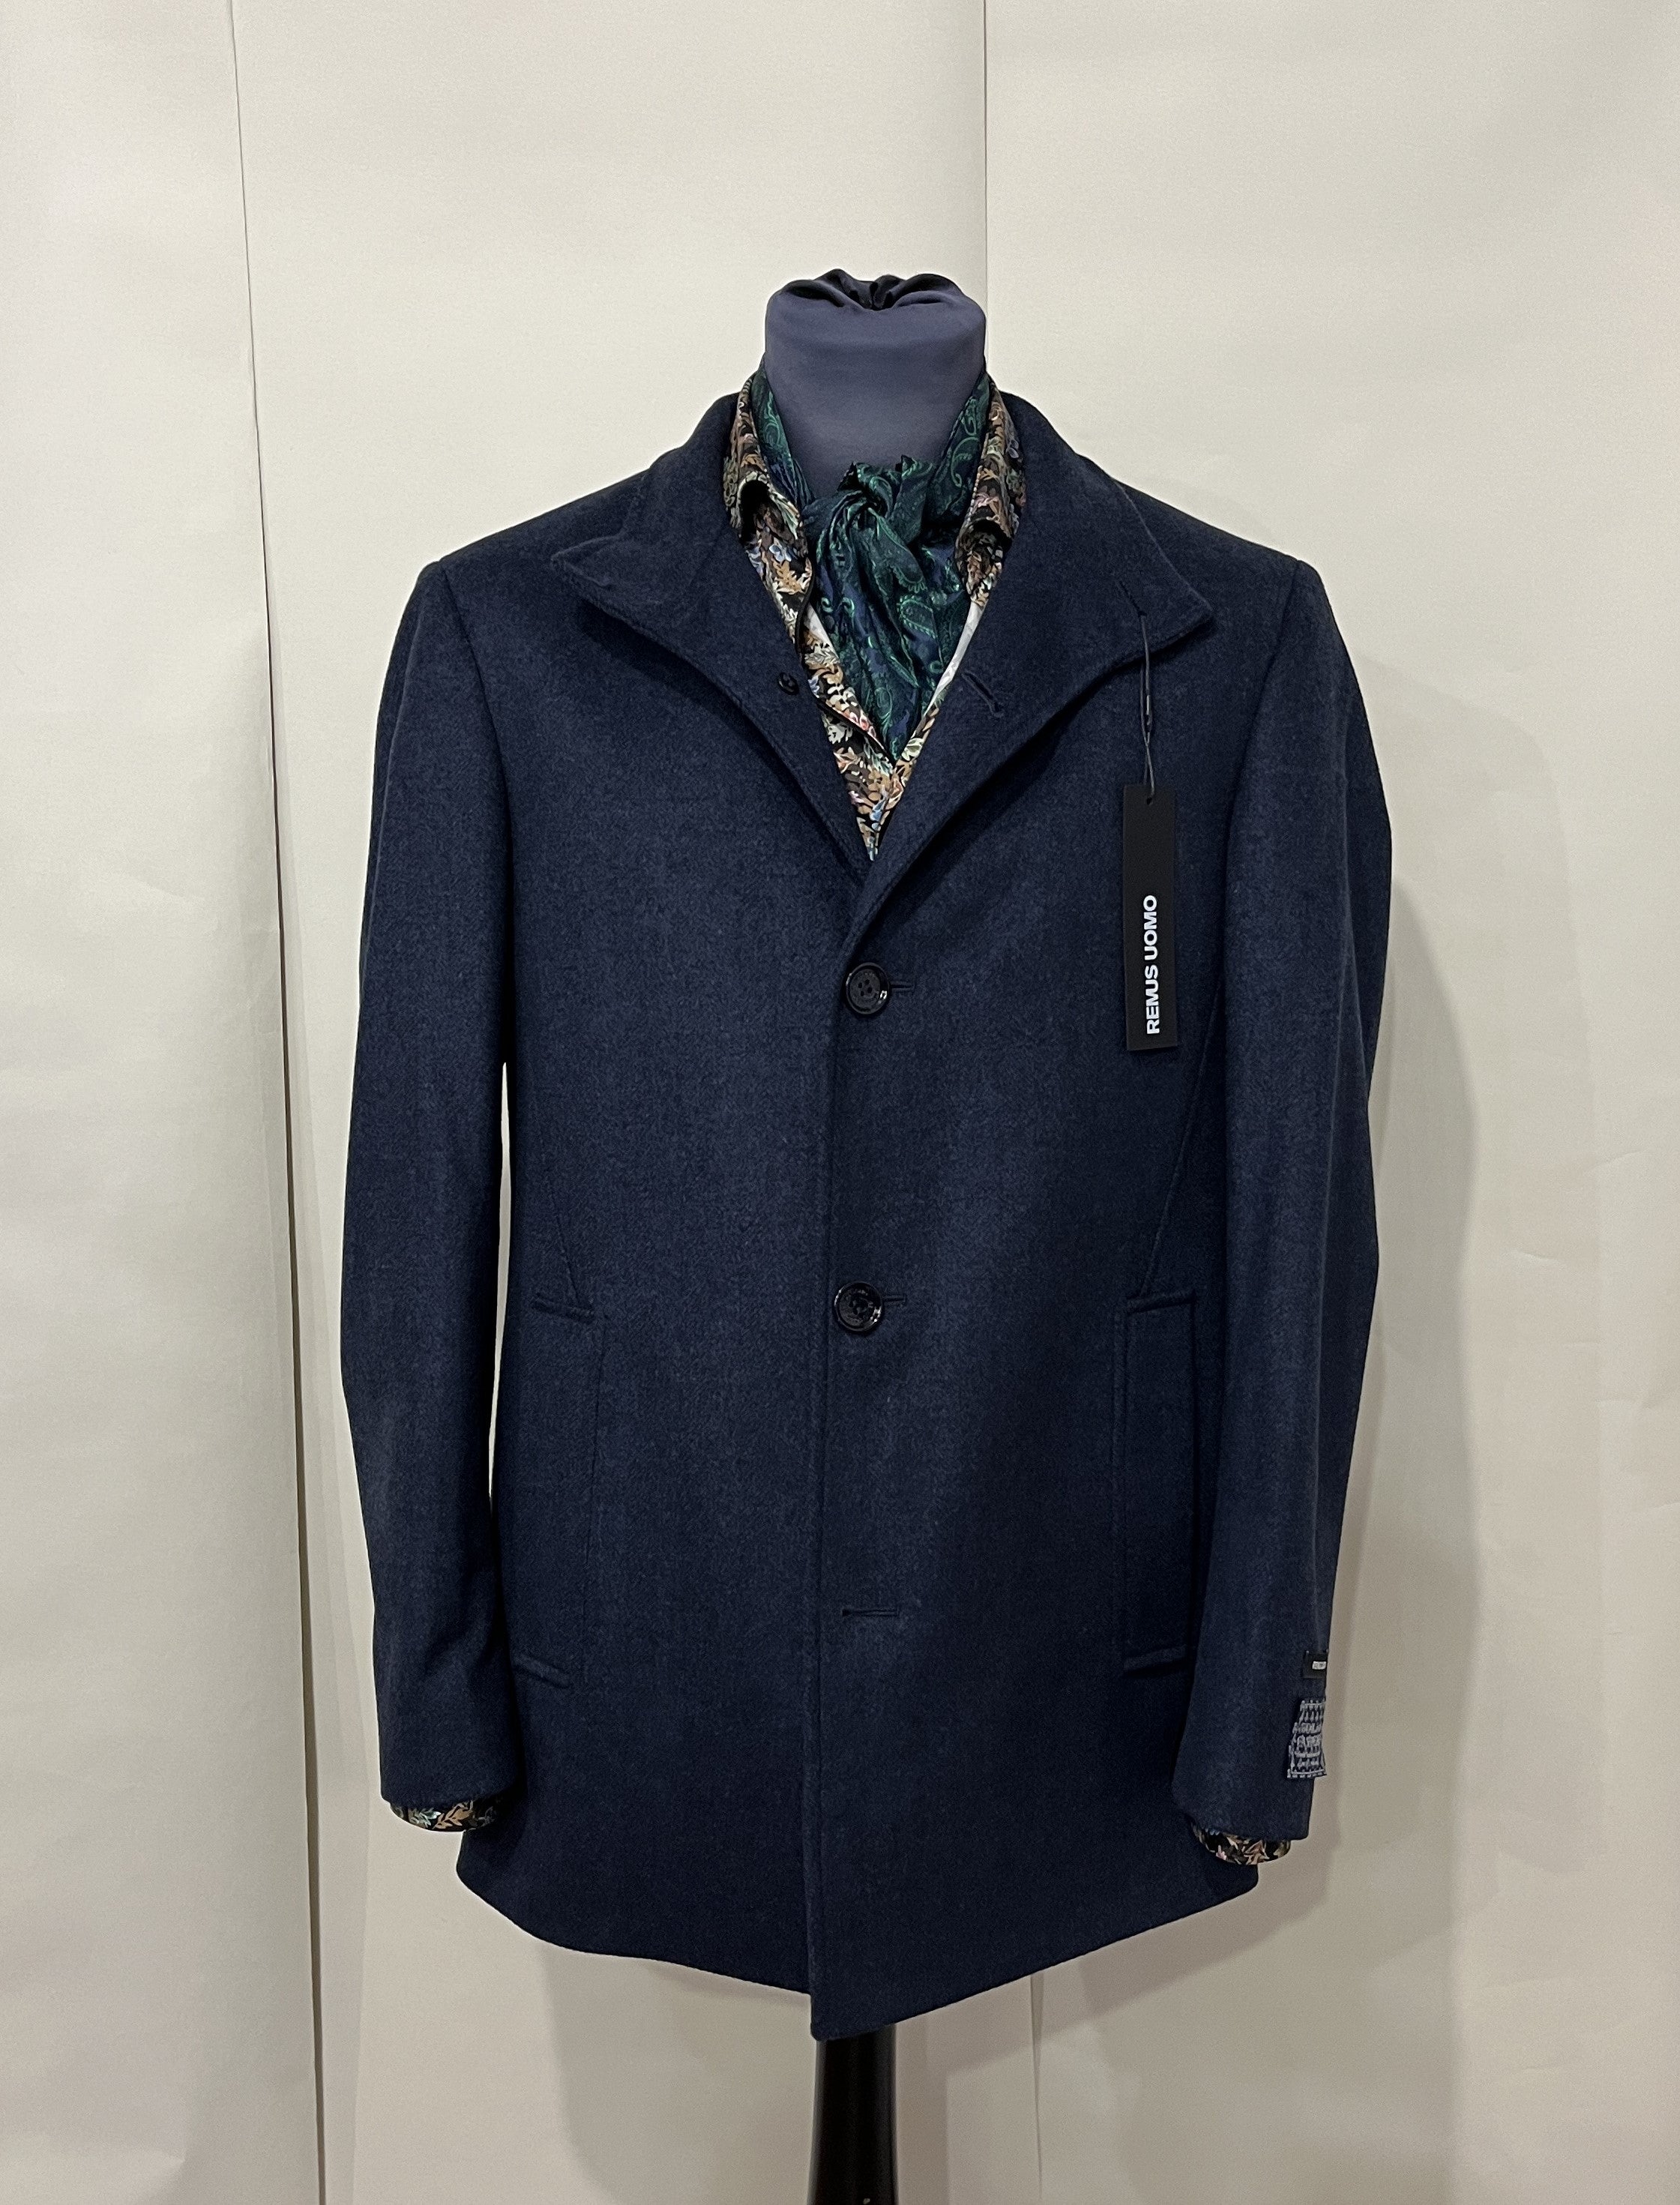 REMUS UOMO NAVY WOOL AND CASHMERE BLEND COAT